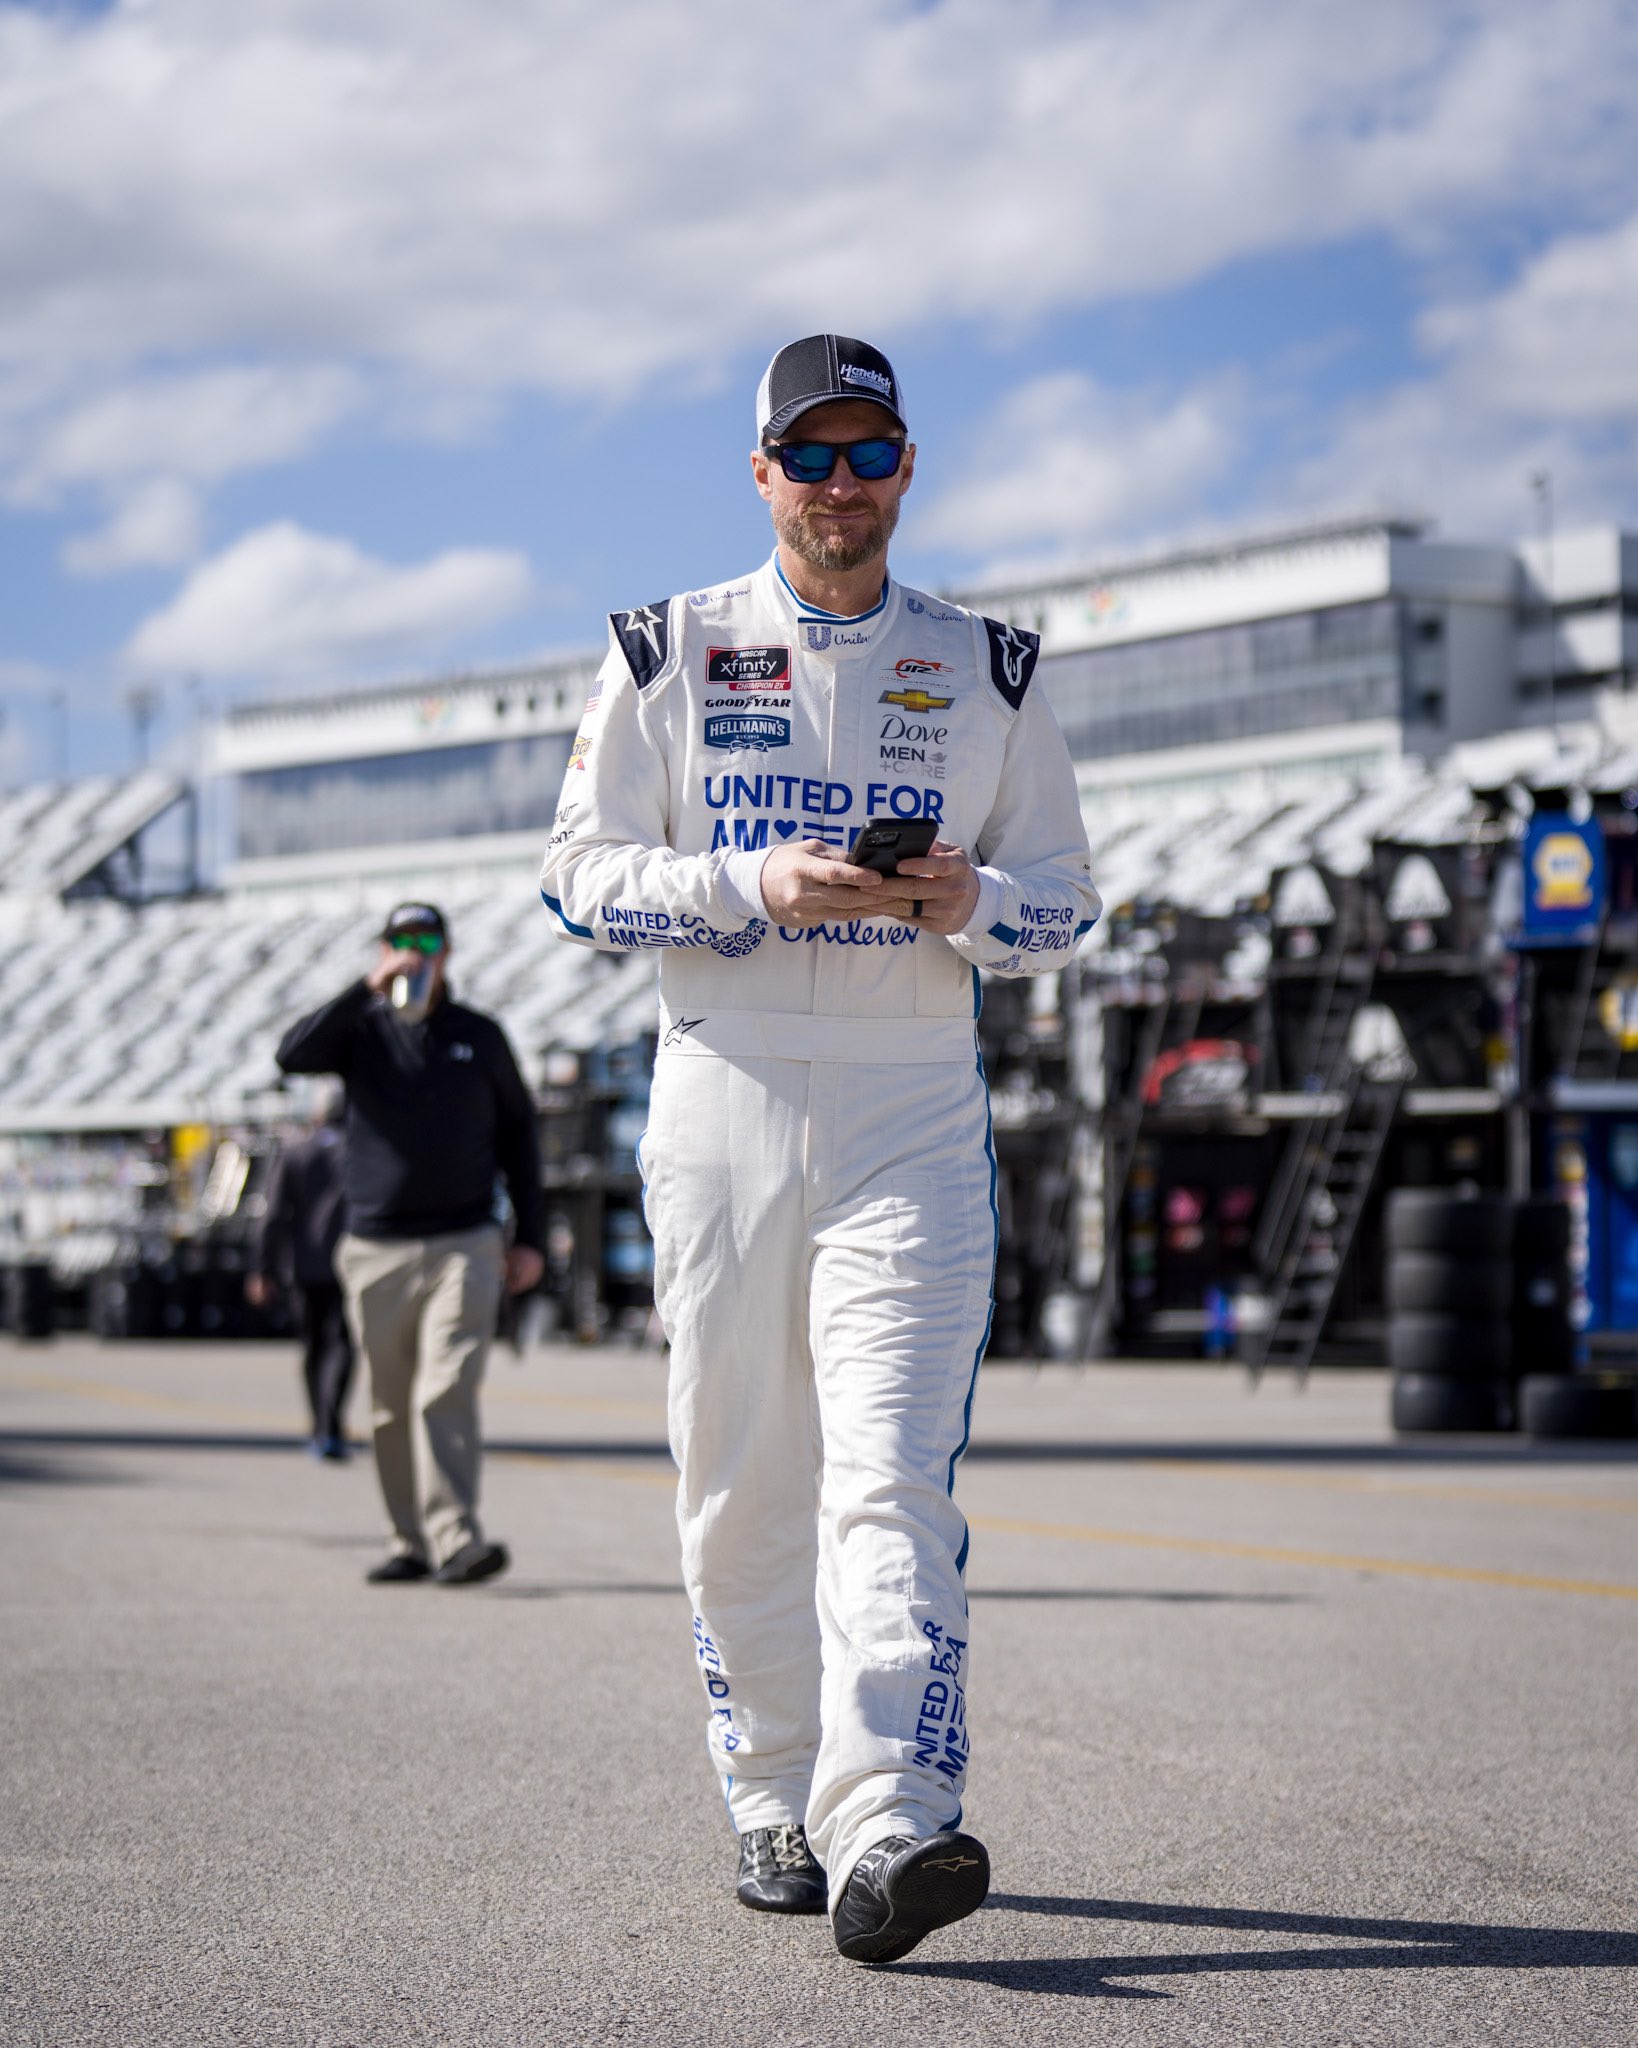 Could Dale Earnhardt Jr. Run Another Cup Series Race?